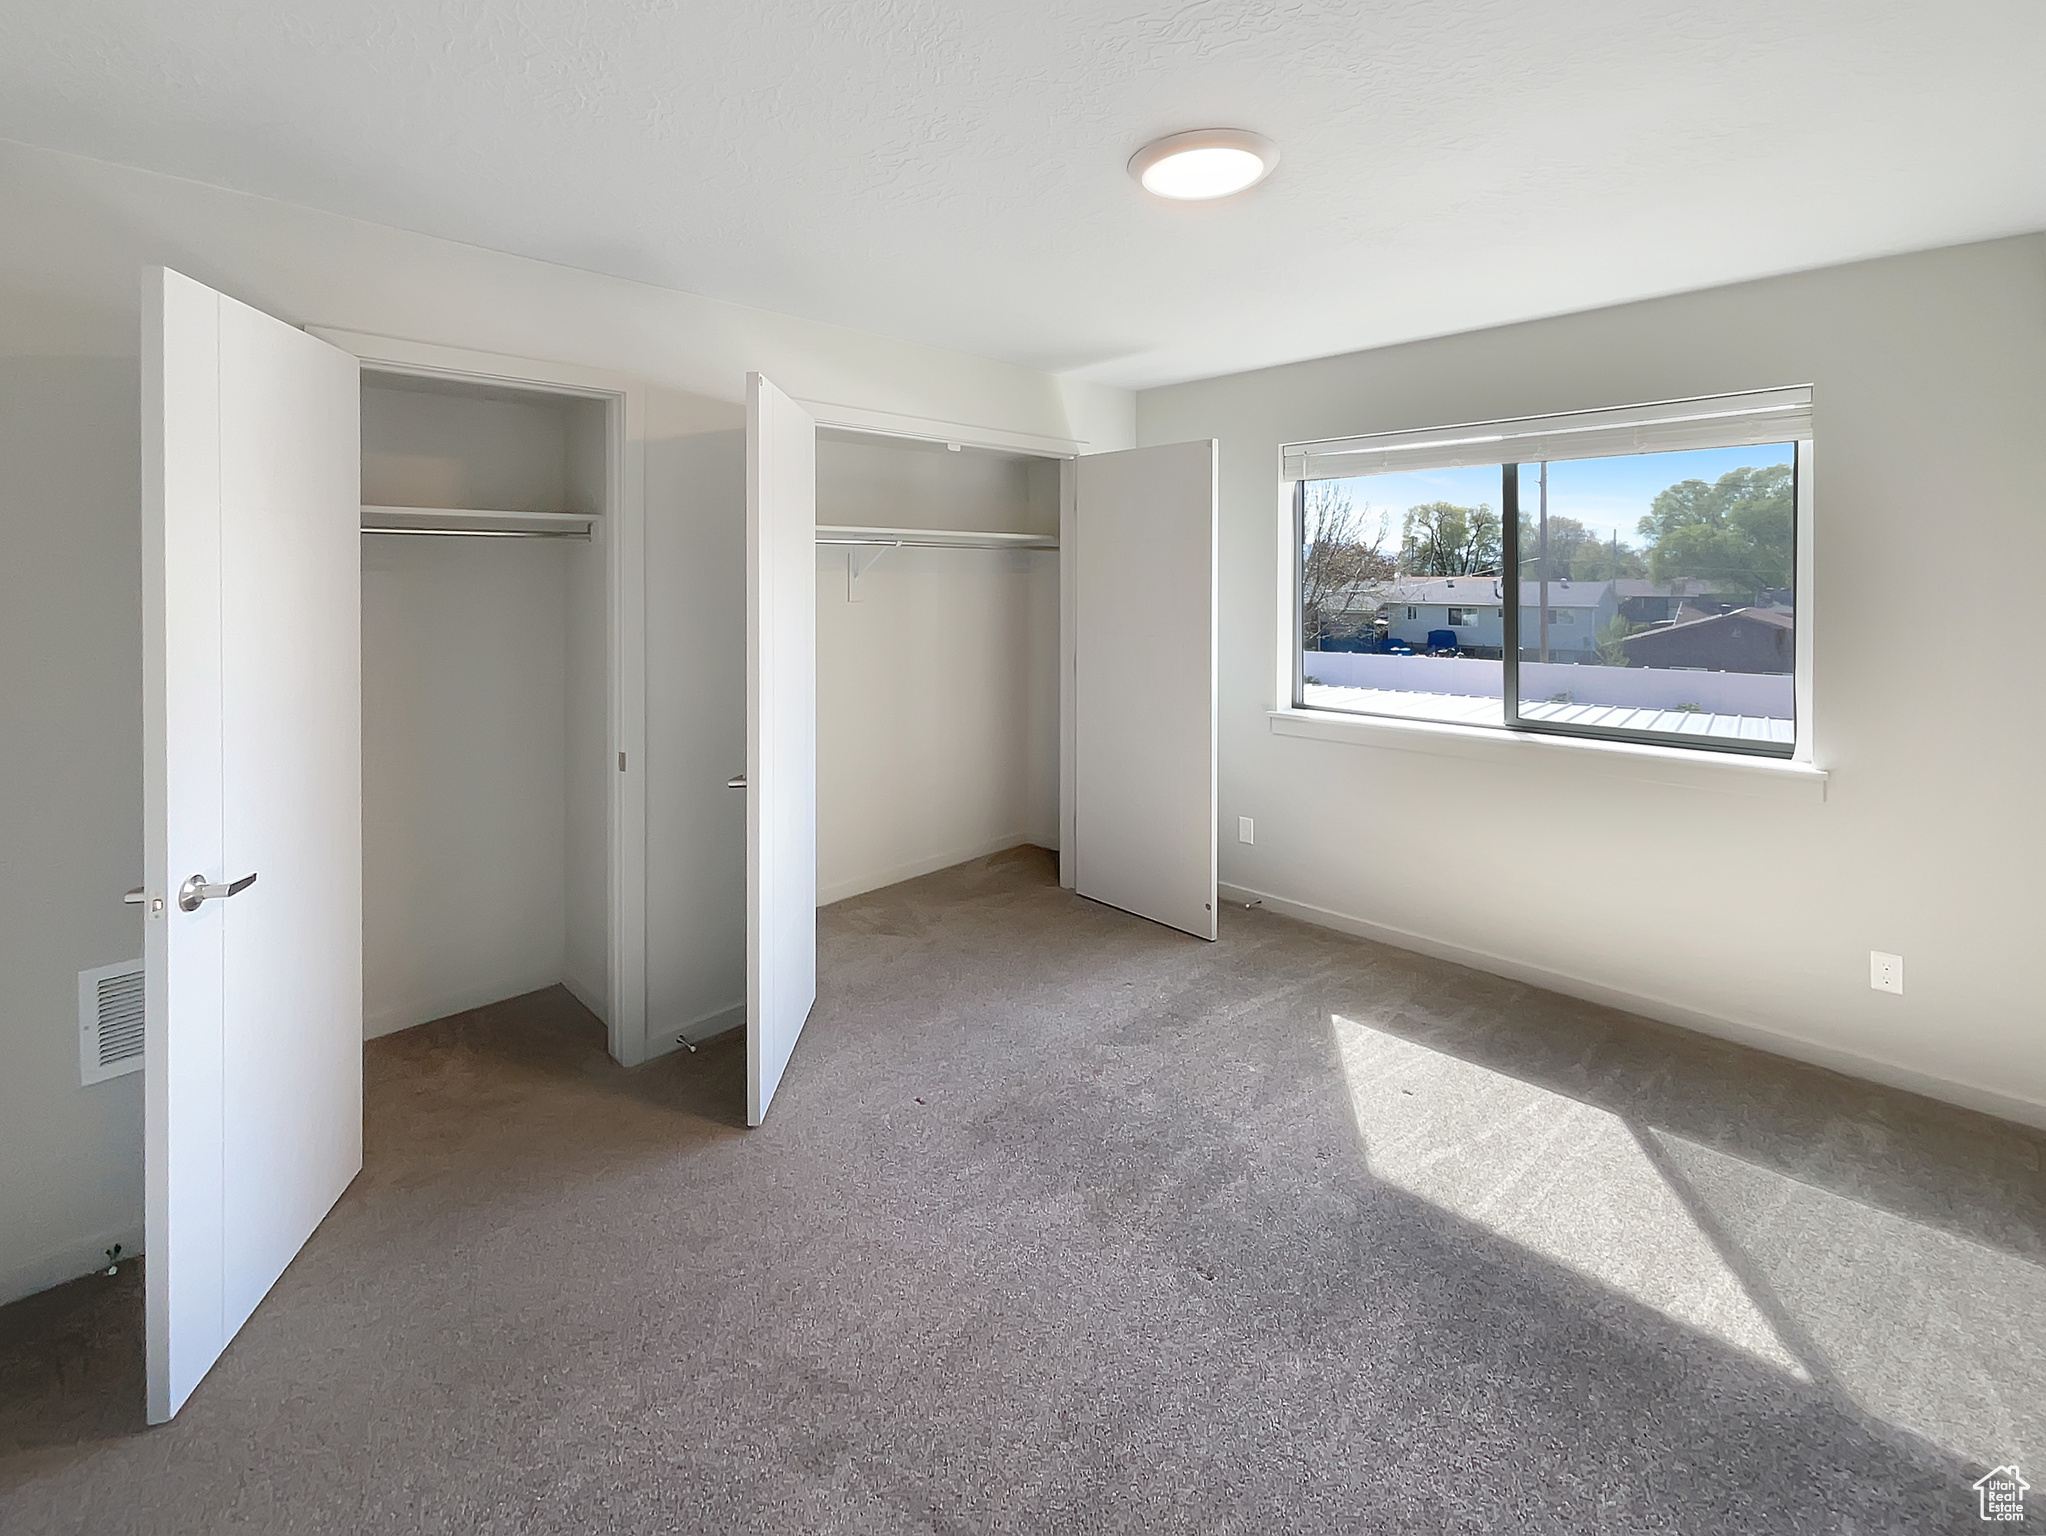 Unfurnished bedroom featuring two closets and carpet floors